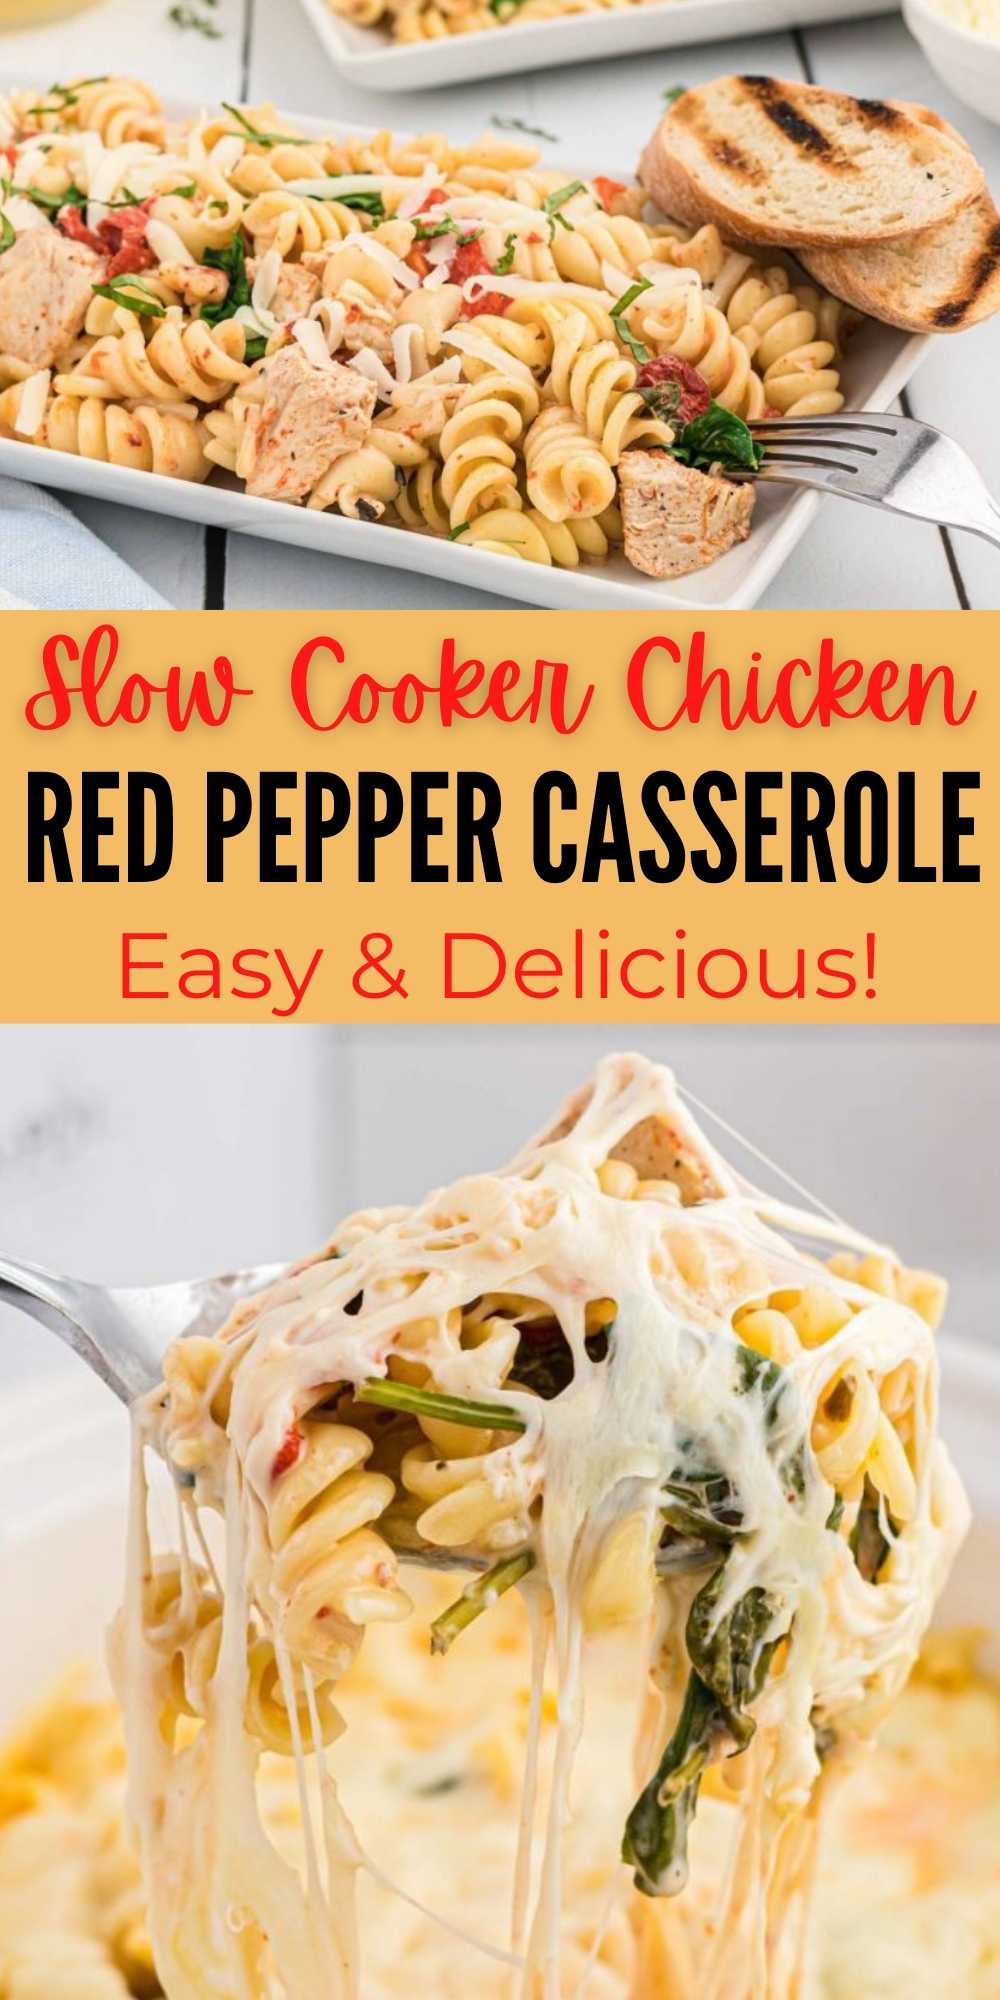 Crock Pot Chicken Red Pepper Casserole is so easy . You will love this creamy red pepper sauce with the chicken and pasta. Easy and delicious casserole recipe. #eatingonadime #crockpotrecipes #redpeppercasserole